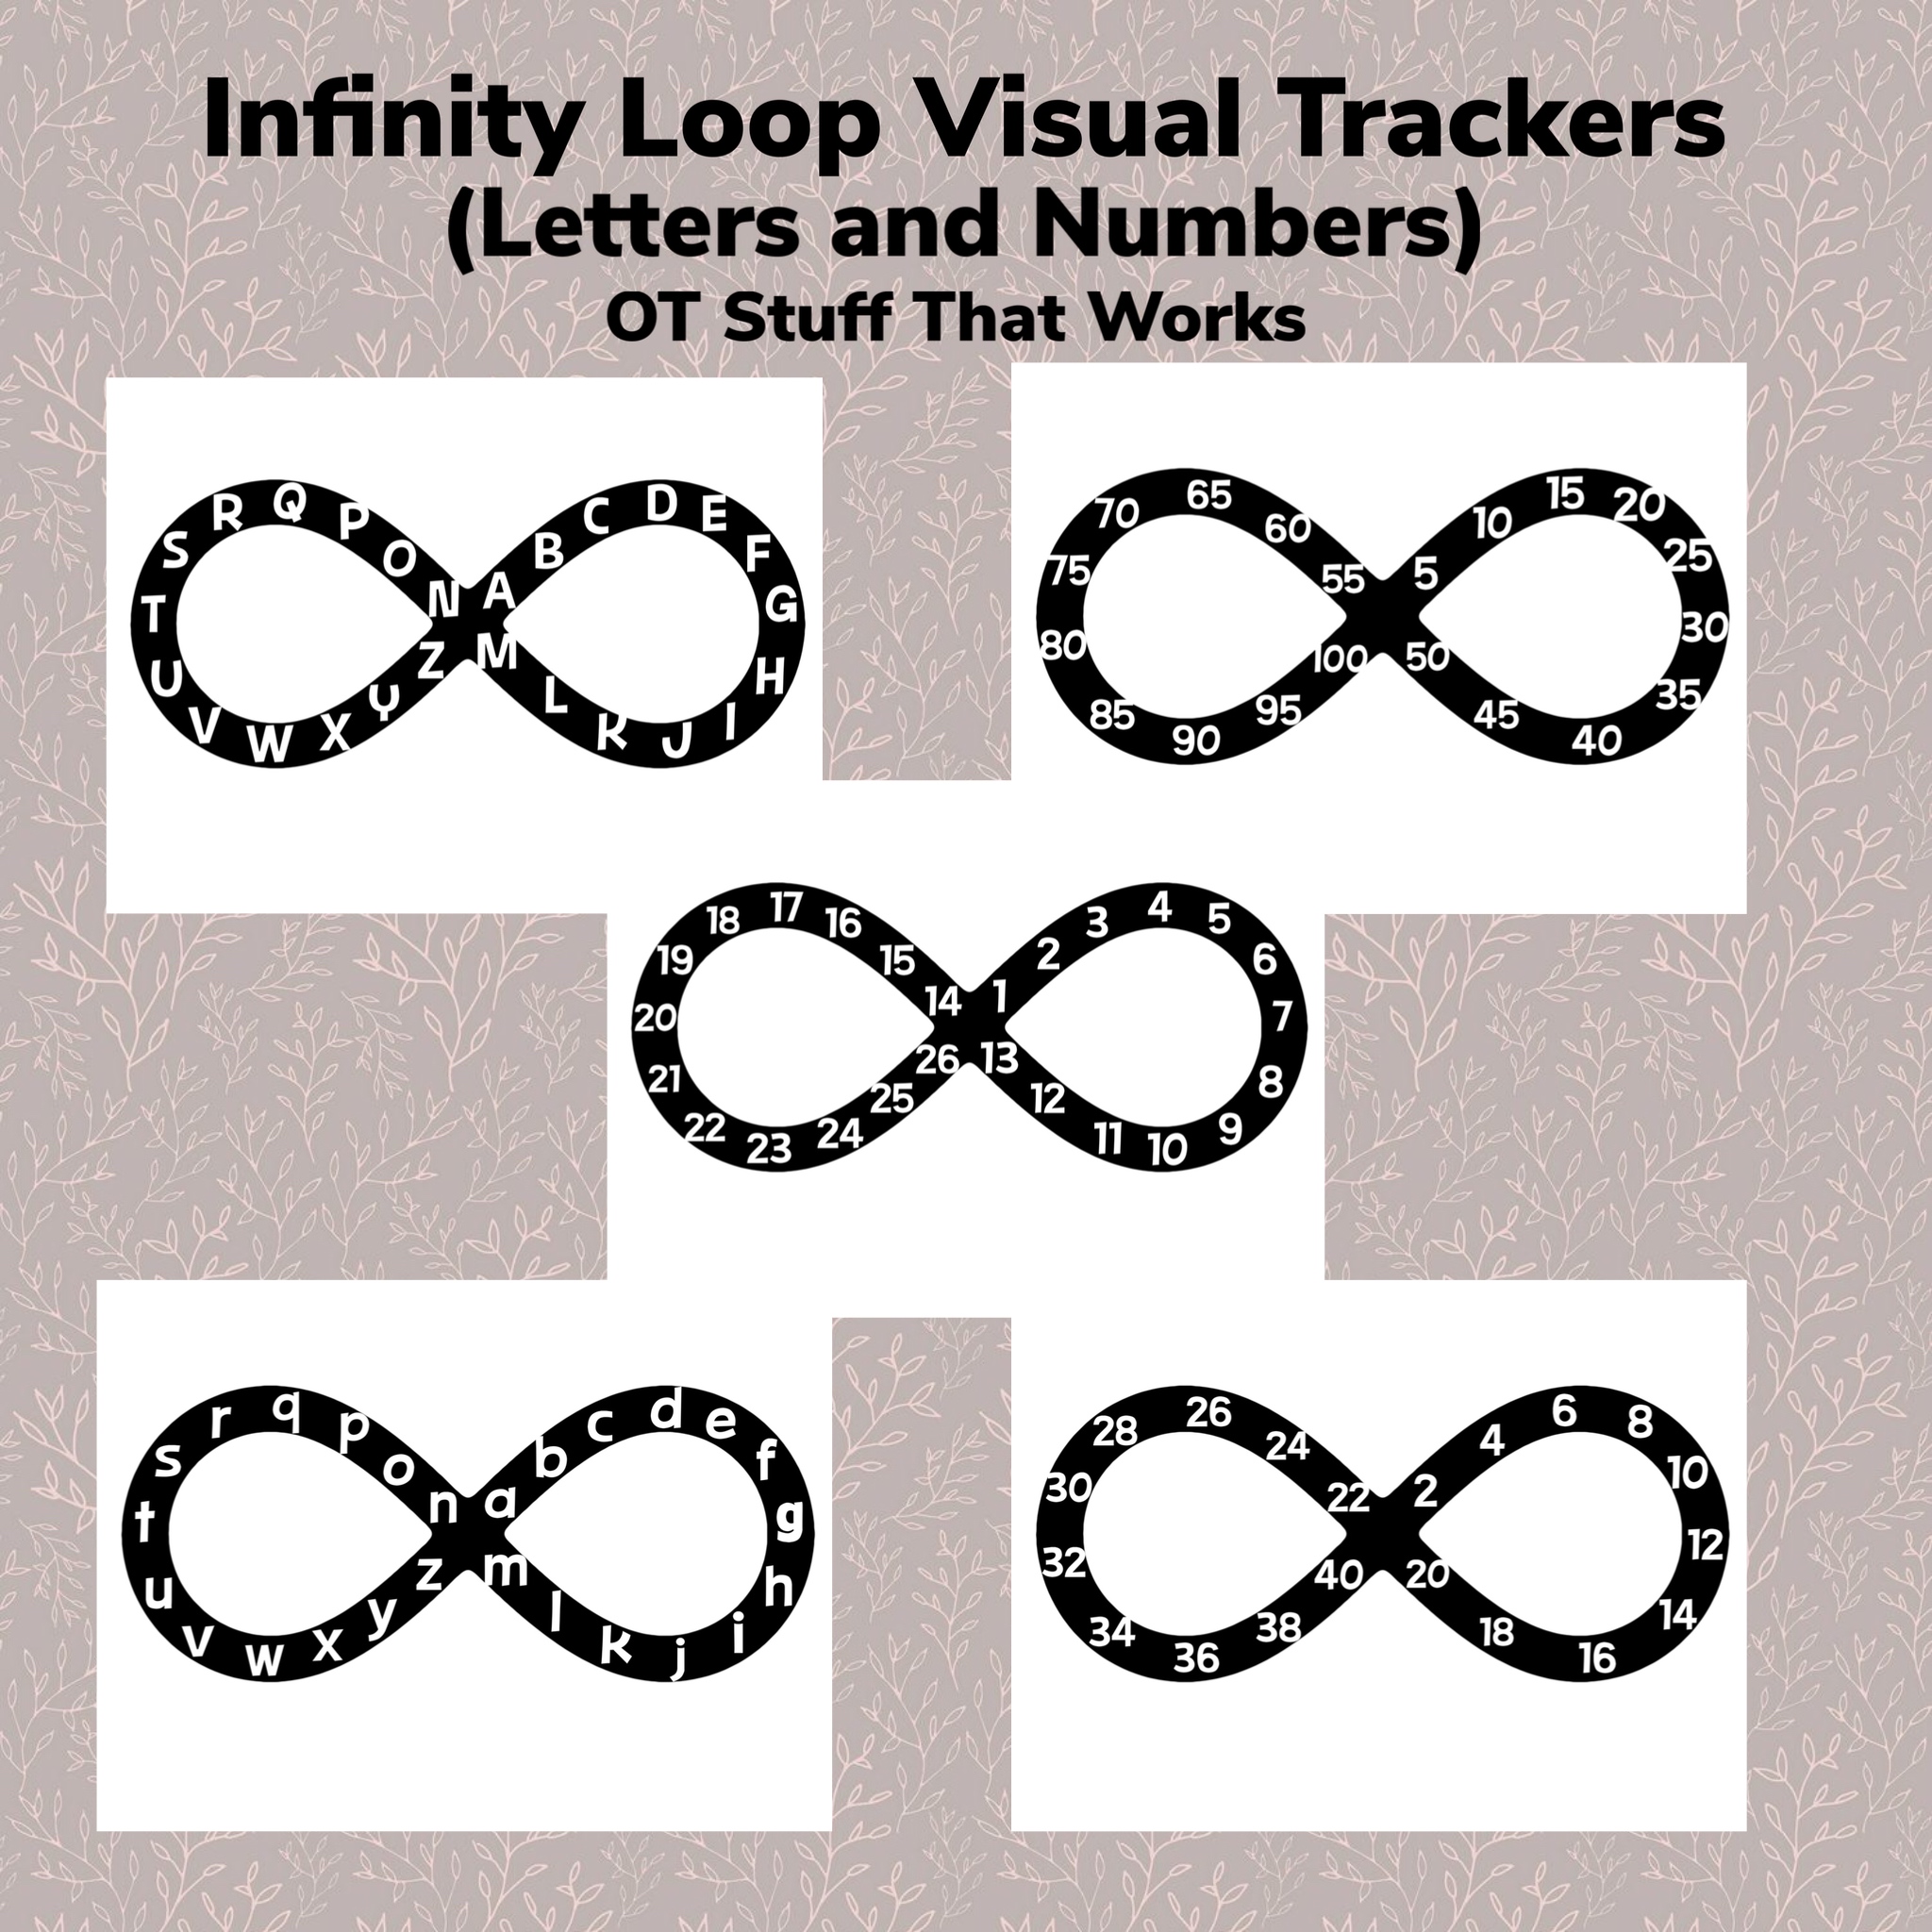 Infinity Loop Visual Trackers (Letters and Numbers)